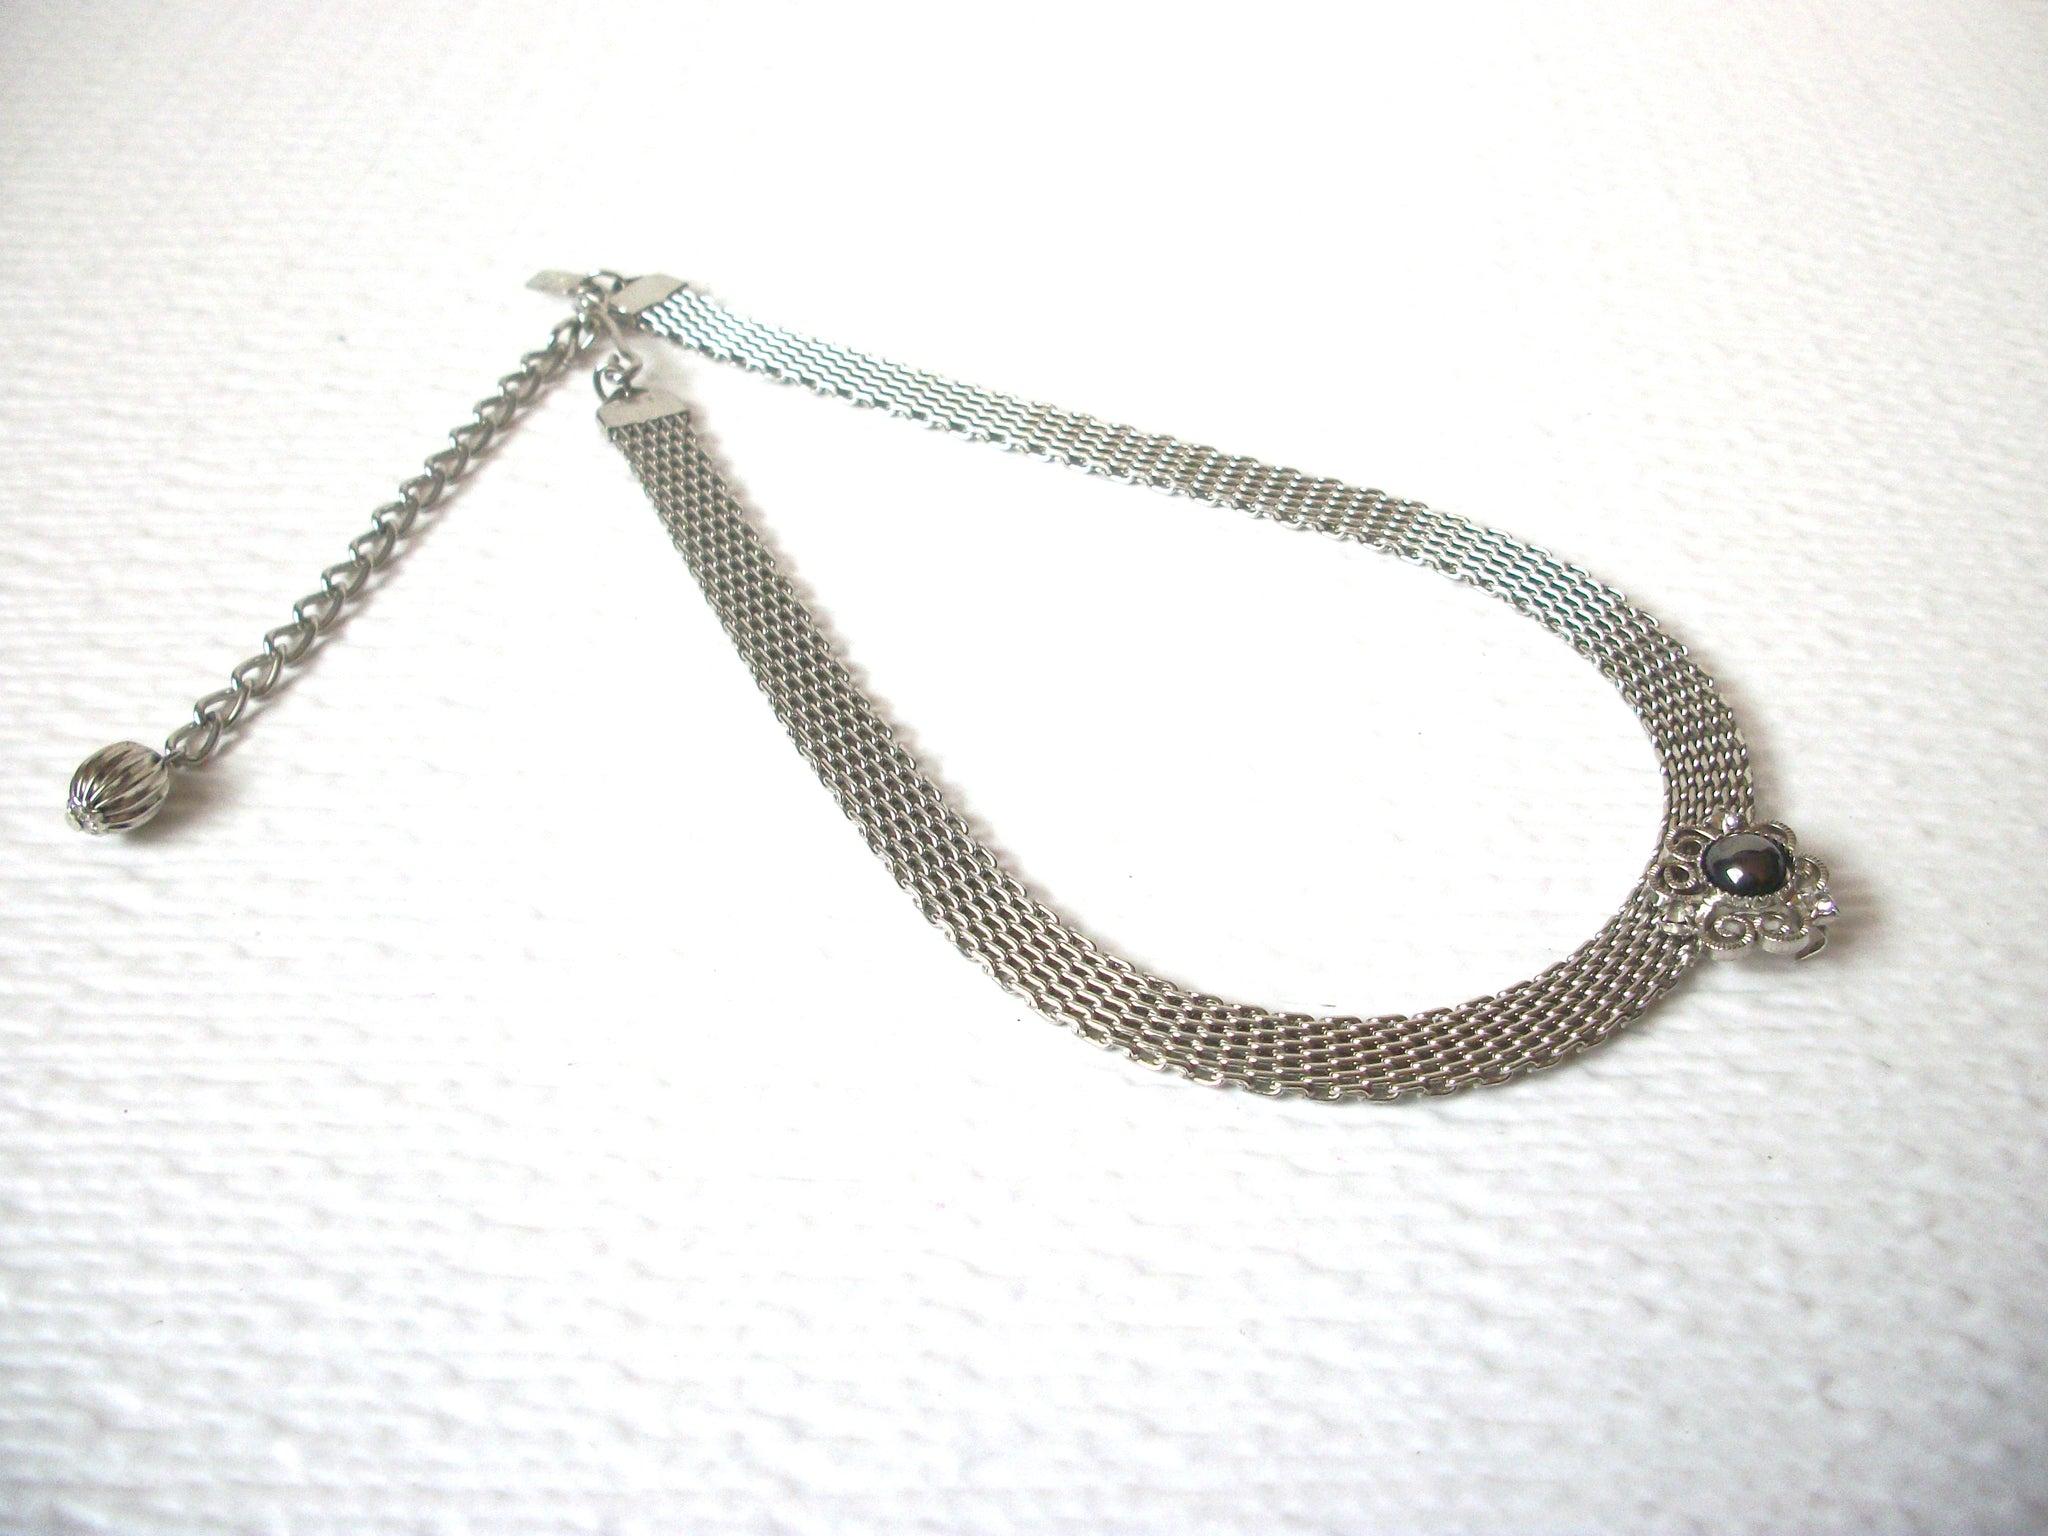 Vintage Act II Silver Toned Hematite Choker Necklace 112520